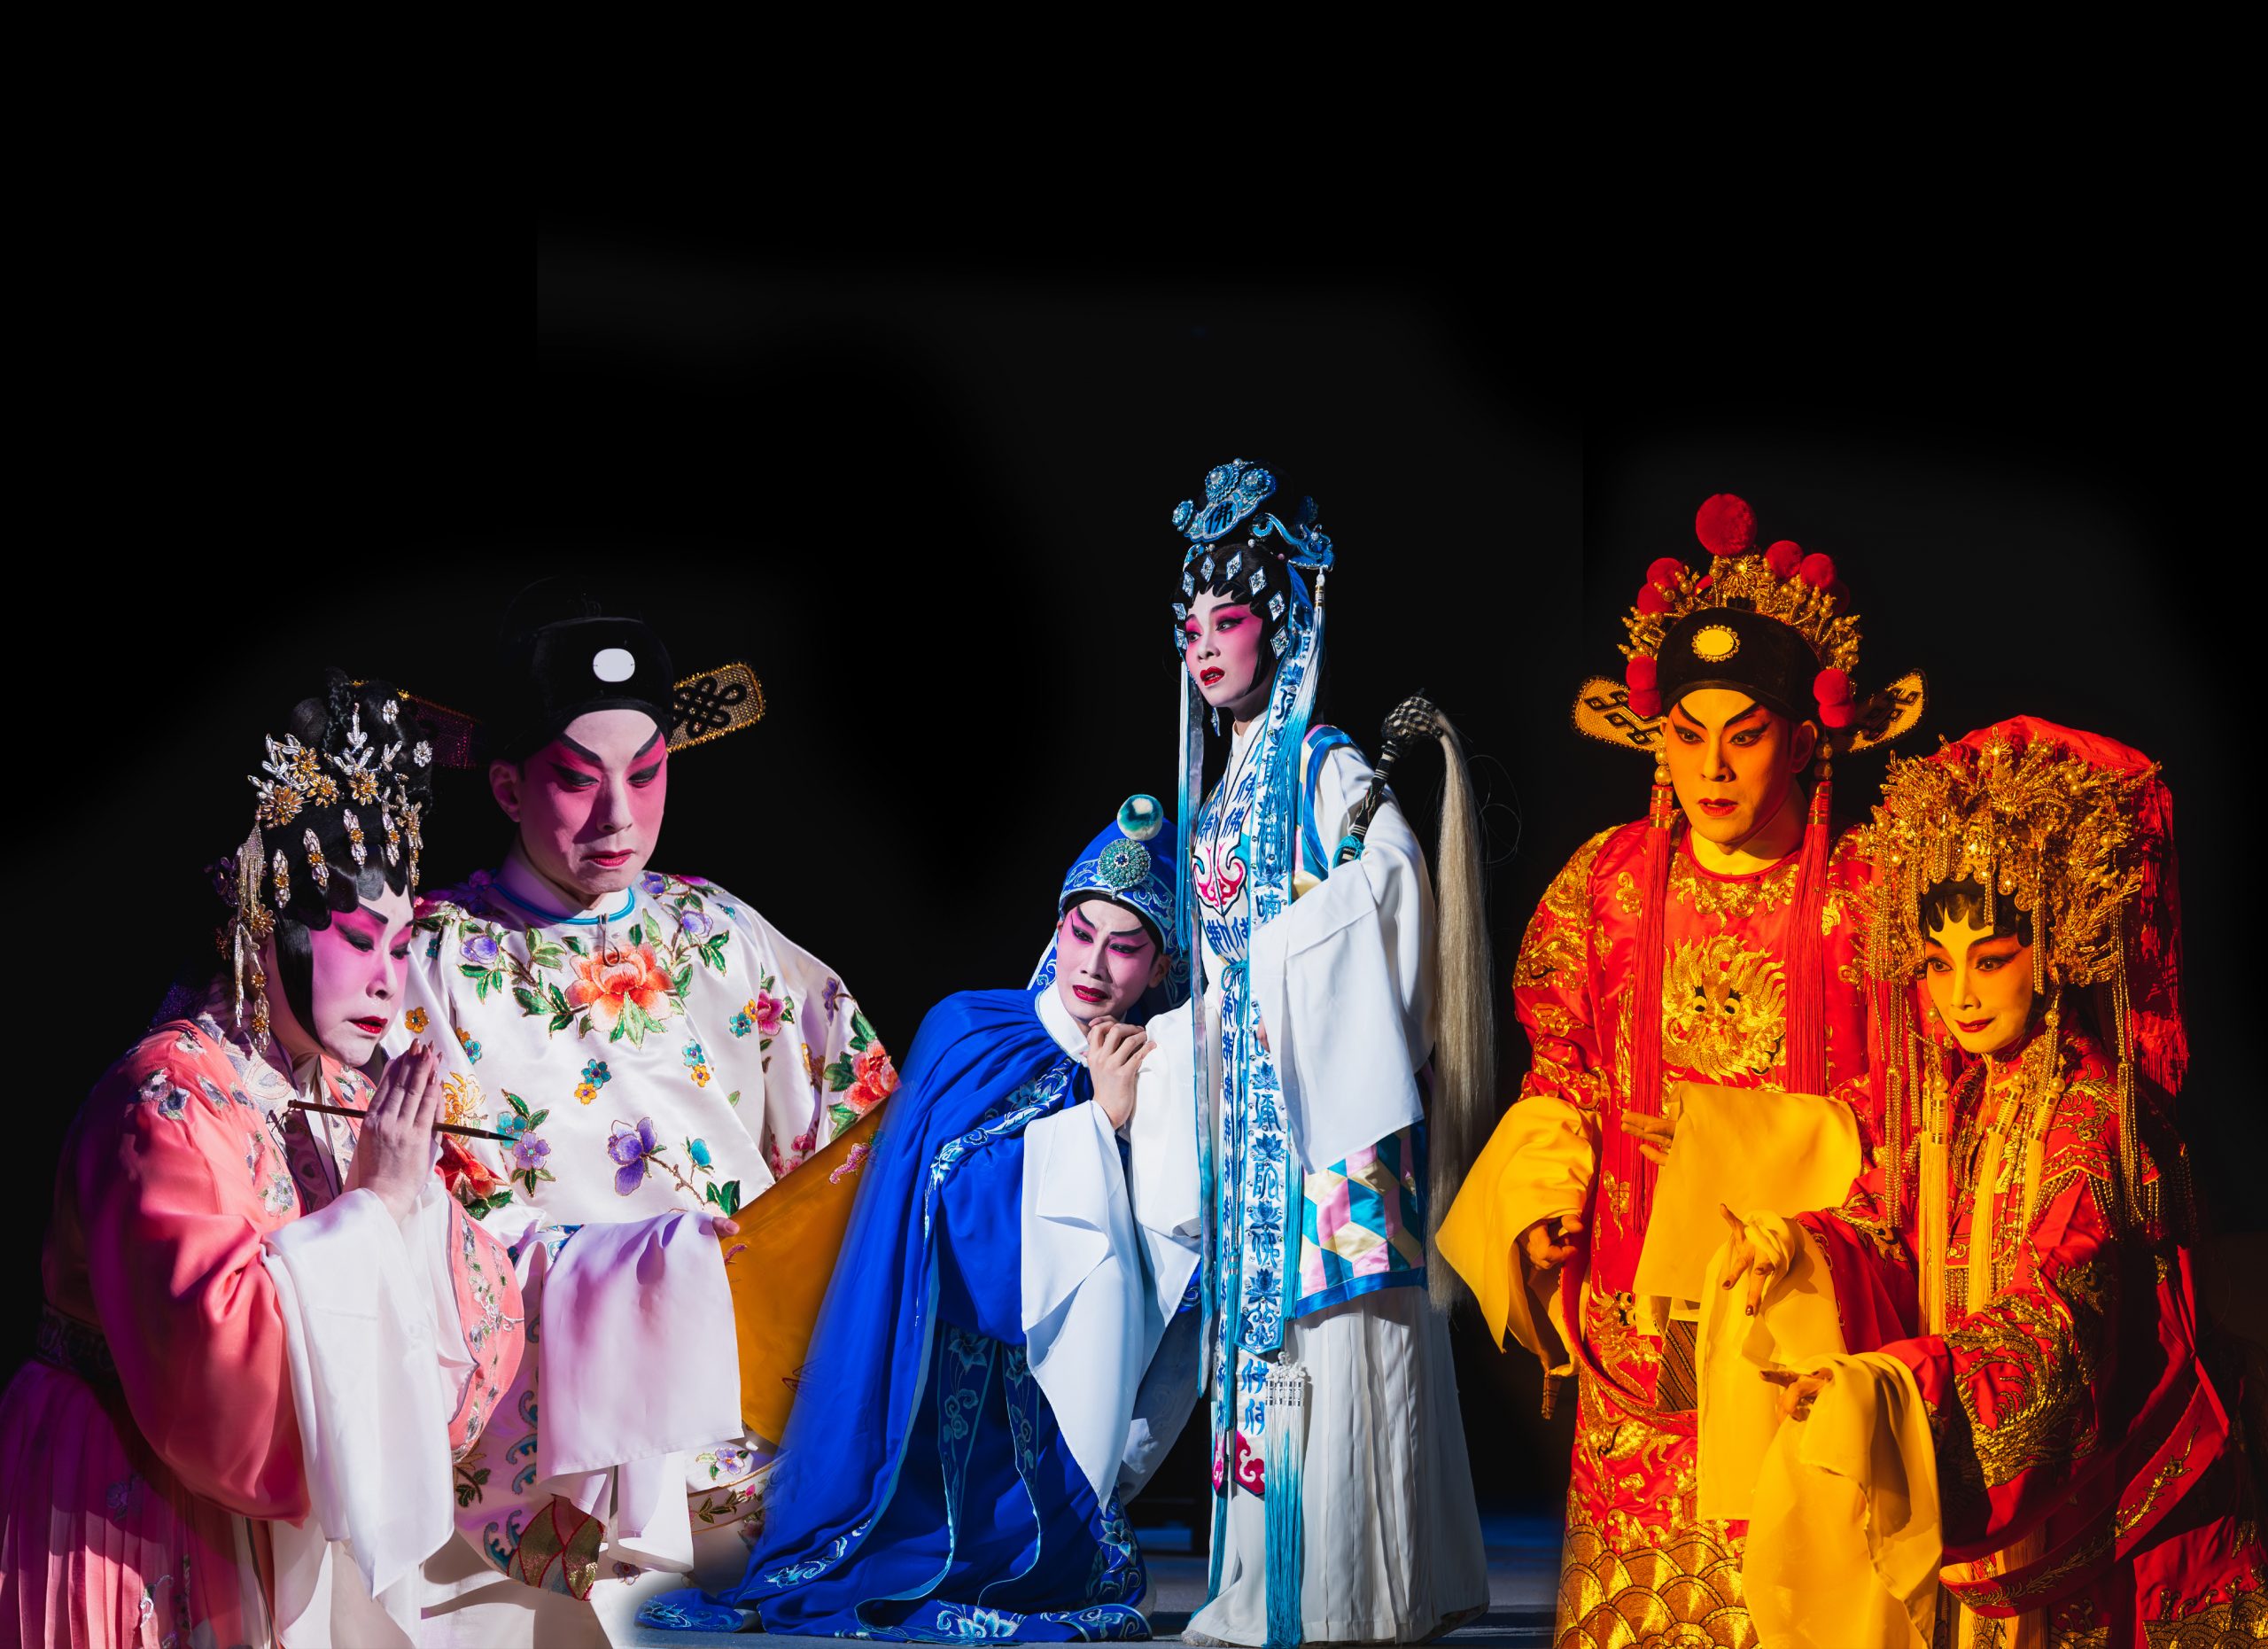 The lead roles in the Floral Princess are being played by both established names and rising stars in Cantonese opera including, from left to right Nan Fung, Lee Lung, Wang Zhiliang, Lin Yingshi, Liang Zhao-ming and Monica Bai